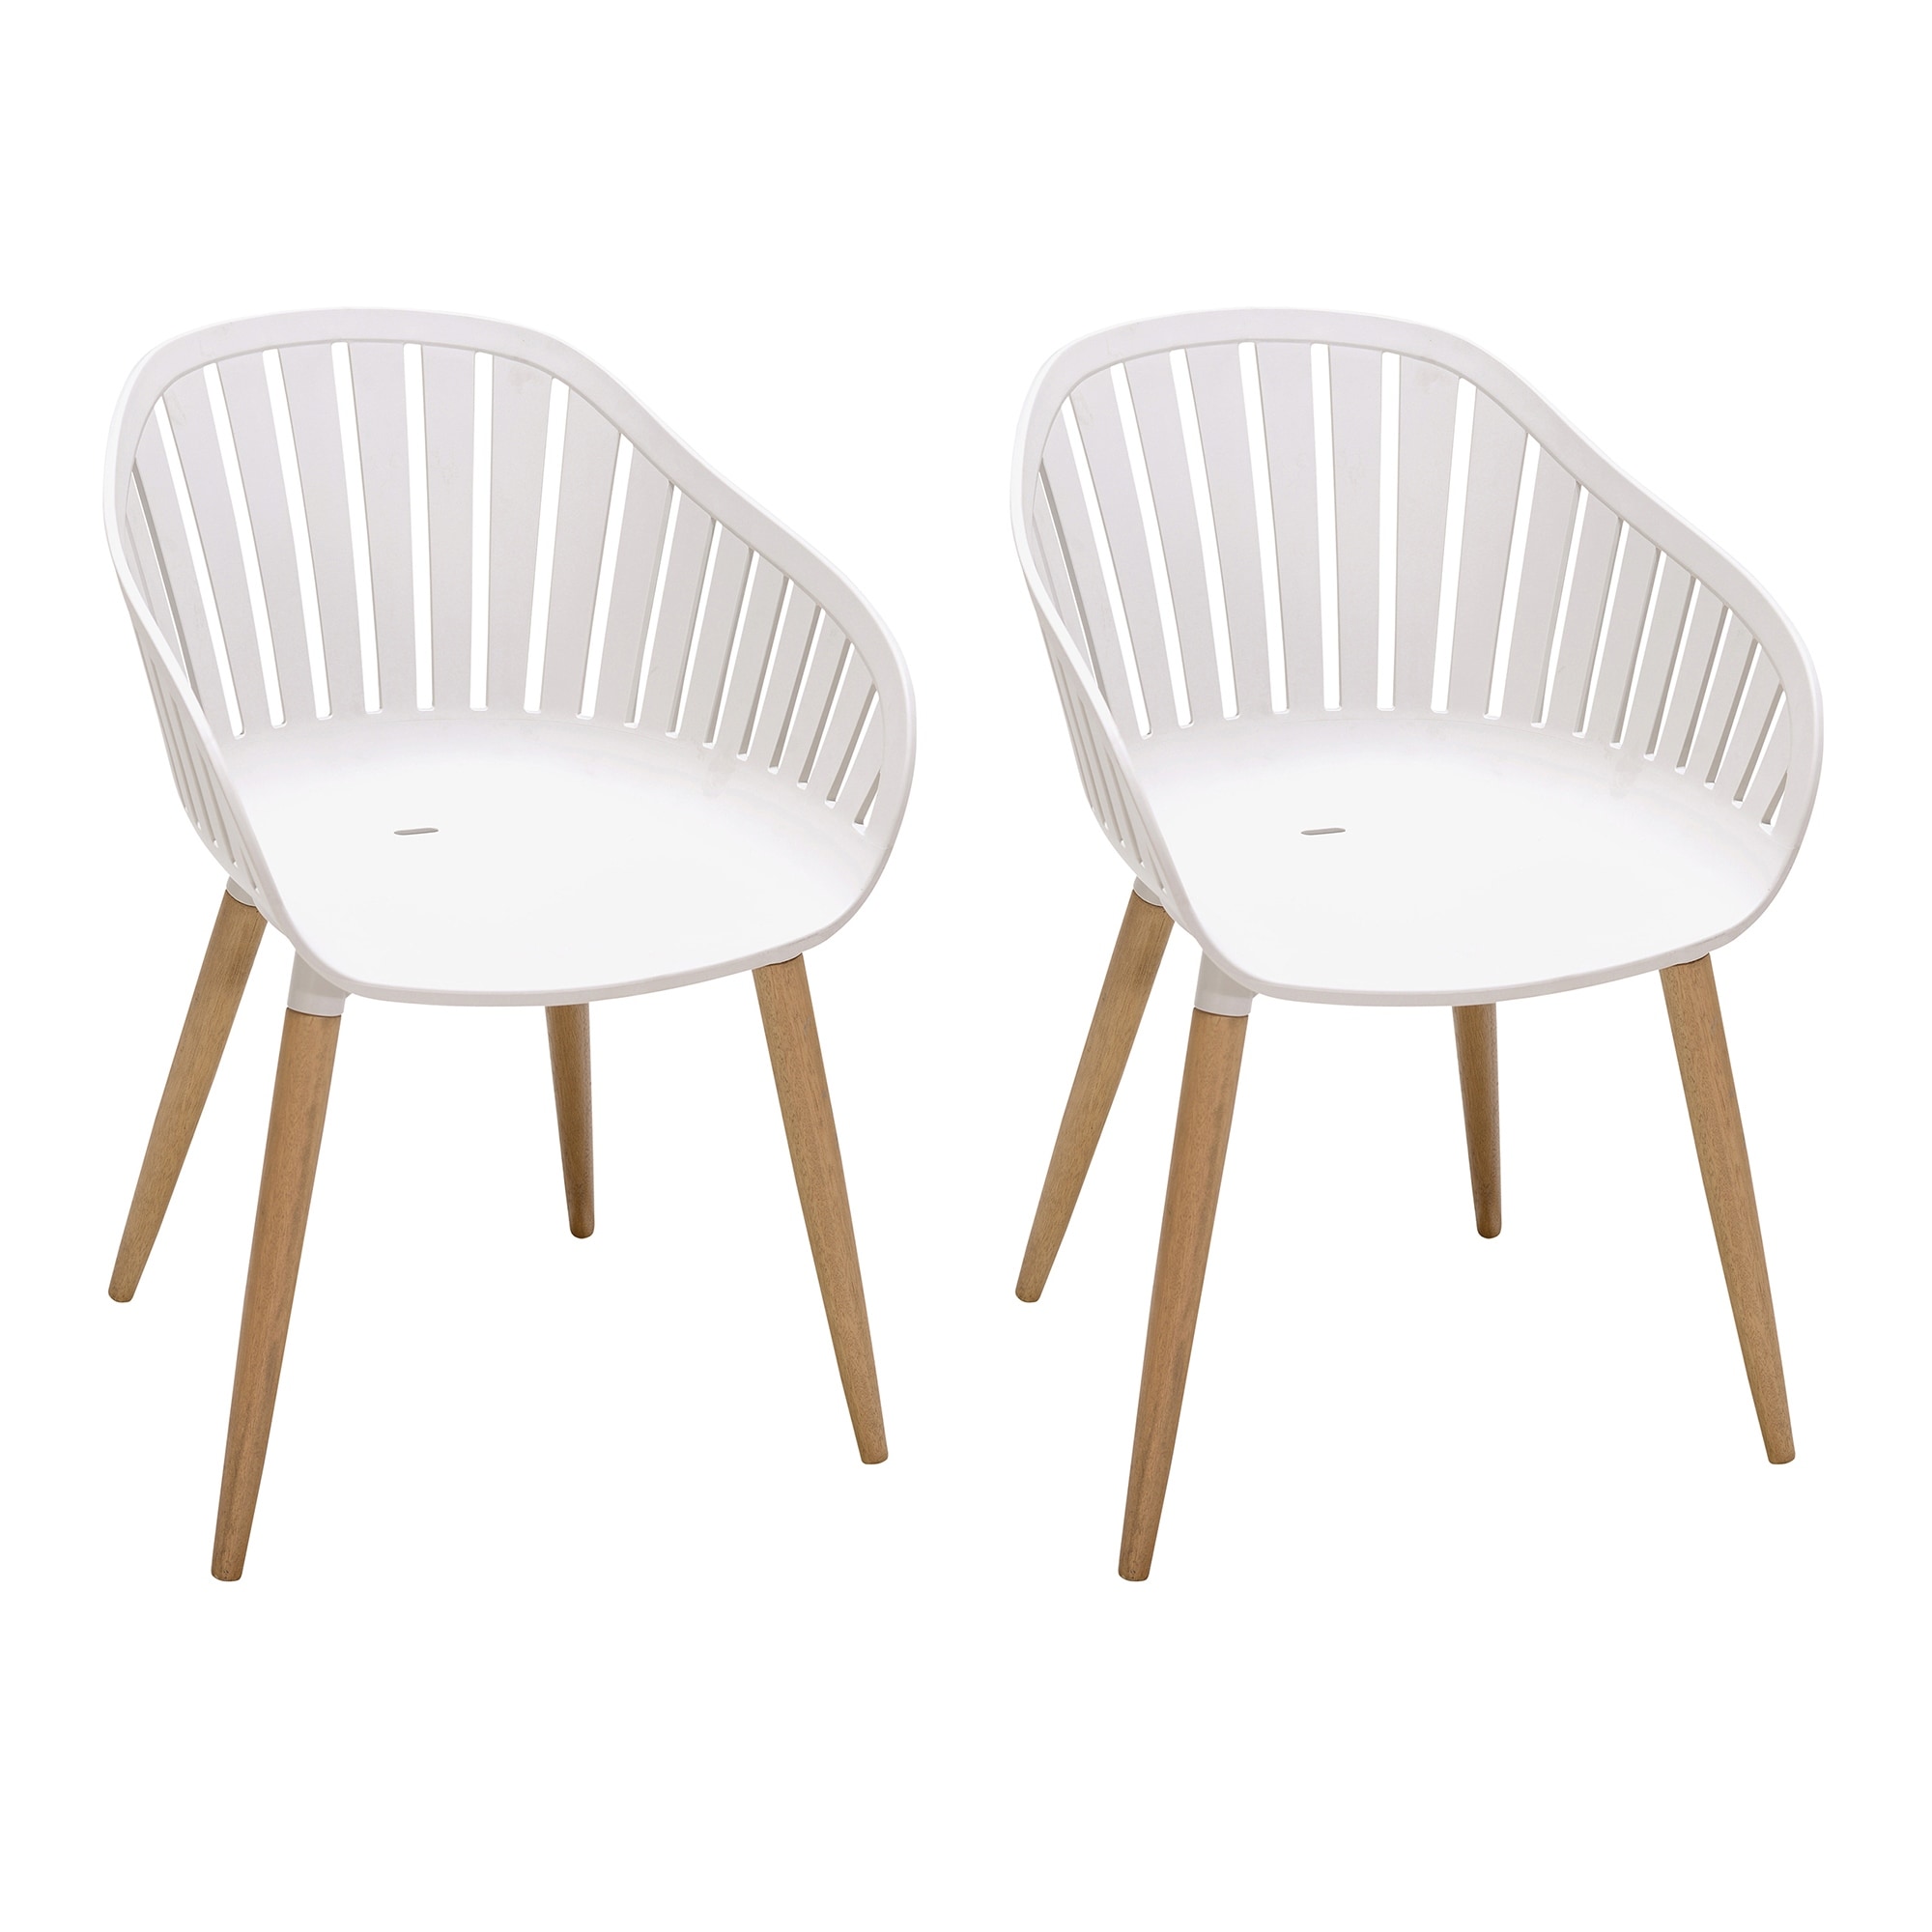 17 Inches Bucket Seat Outdoor Plastic Arm Chair, Set of 2, White